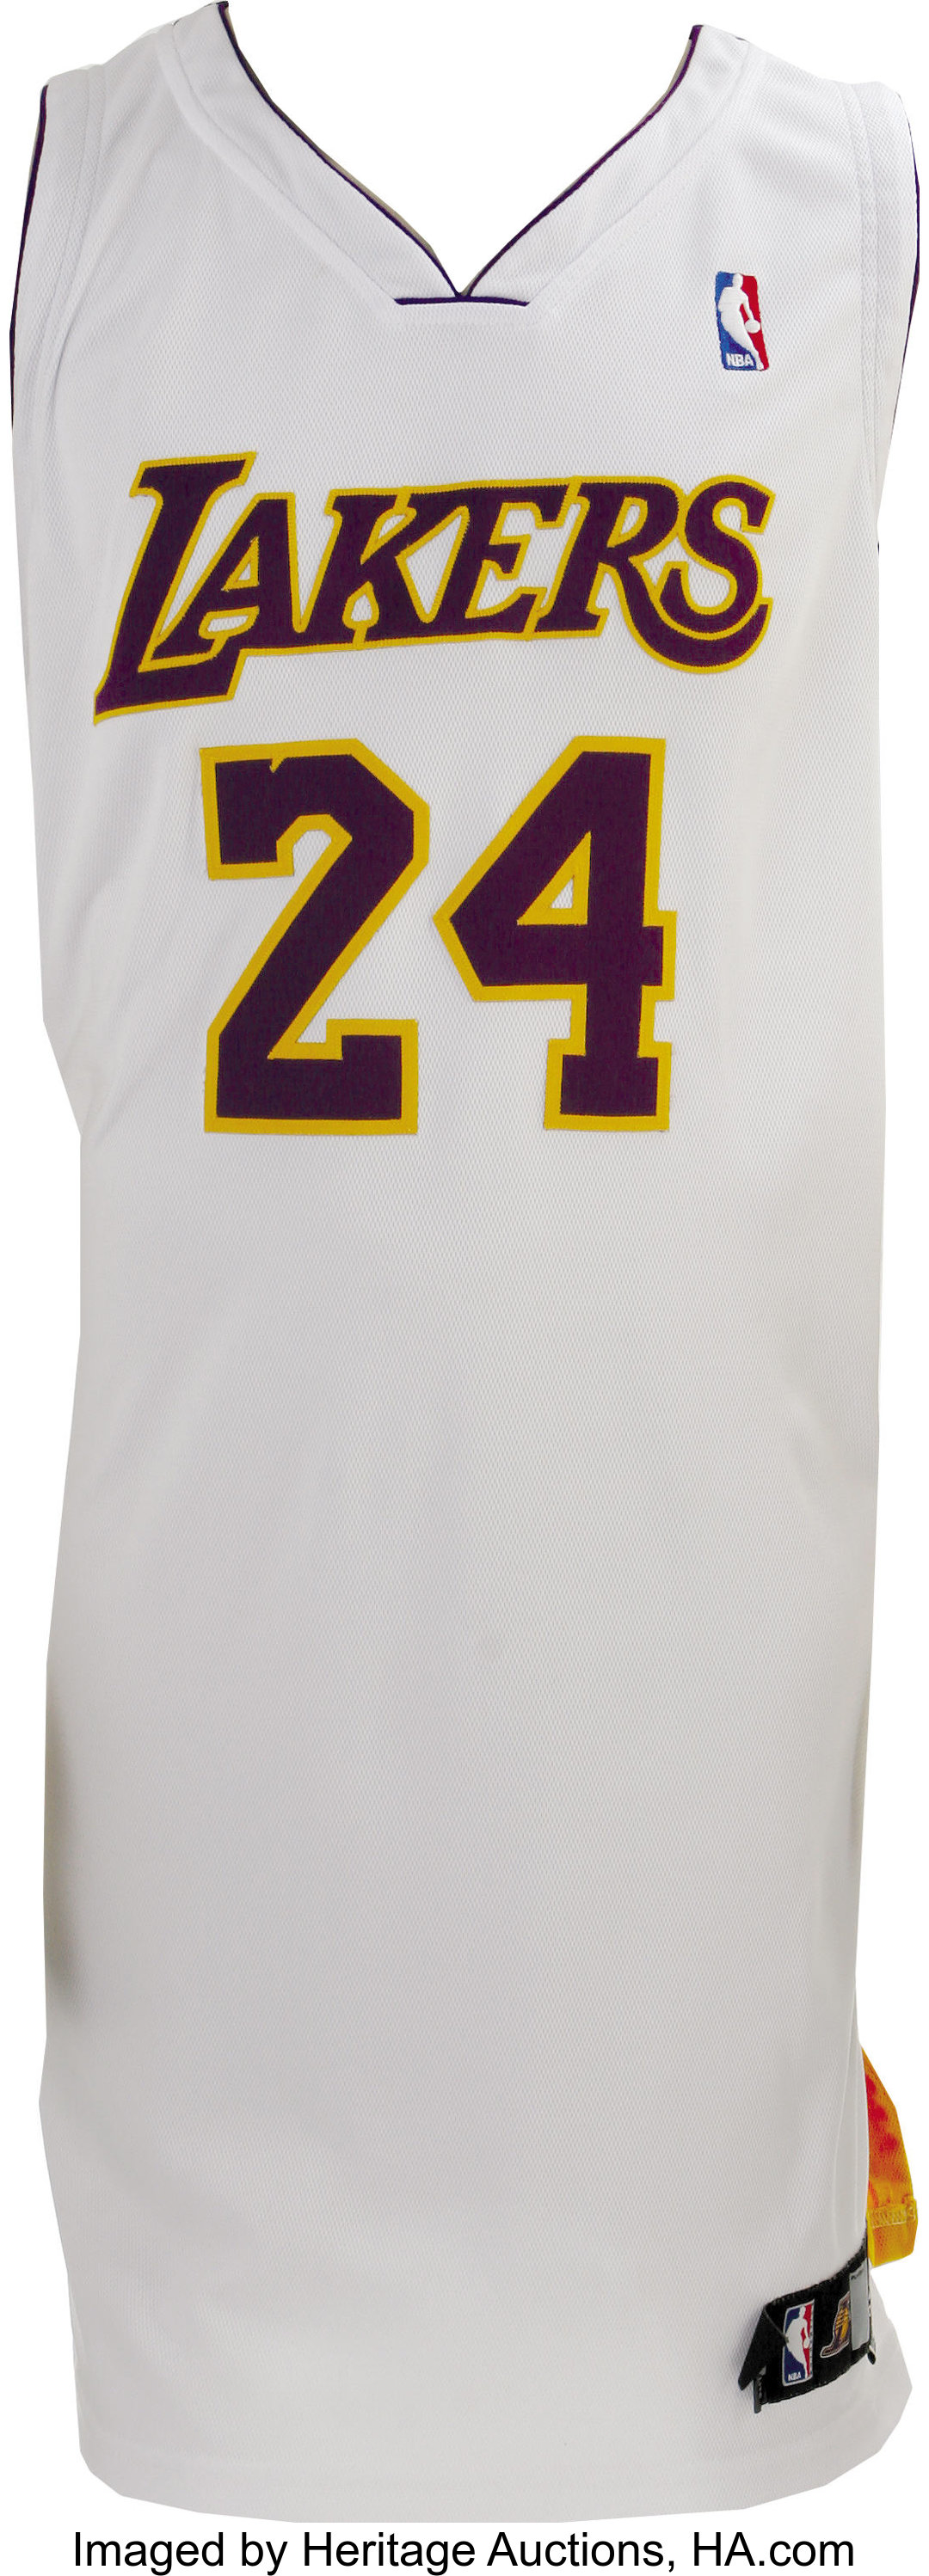 Best * Rare Kobe Bryant 2006 All-star Jersey* (see Description For Full  Details) Obo for sale in Brazoria County, Texas for 2023